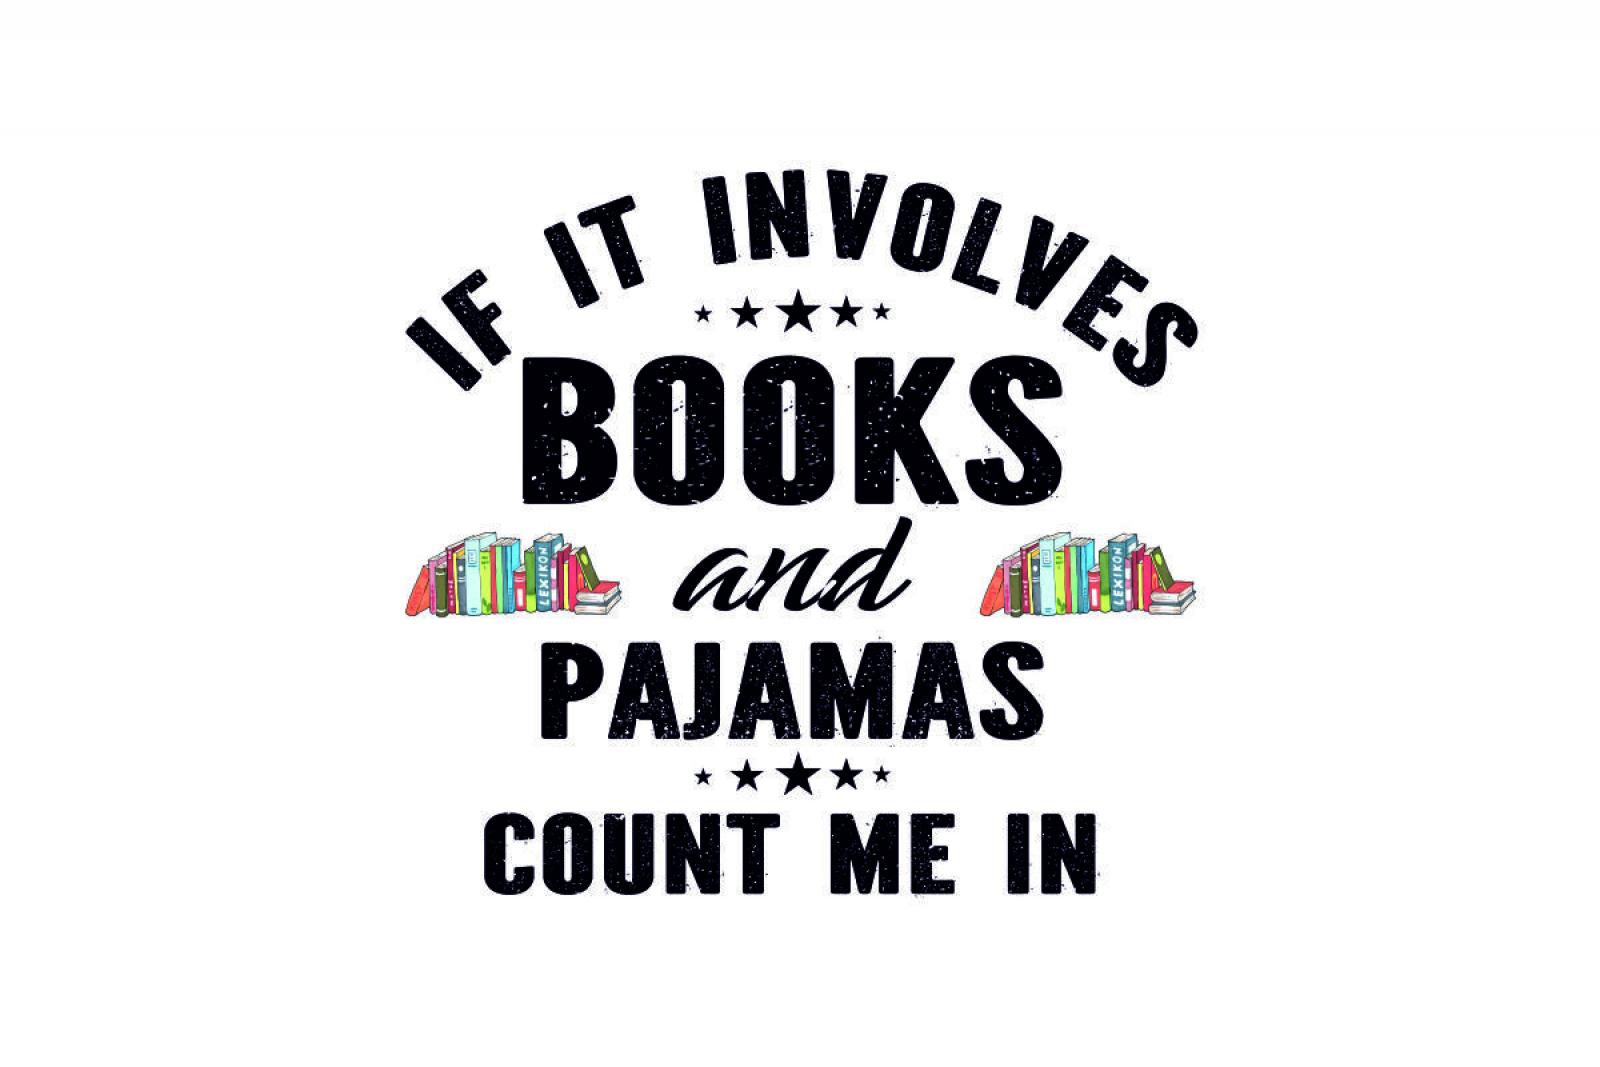 If it involves books and pajamas, count me in.